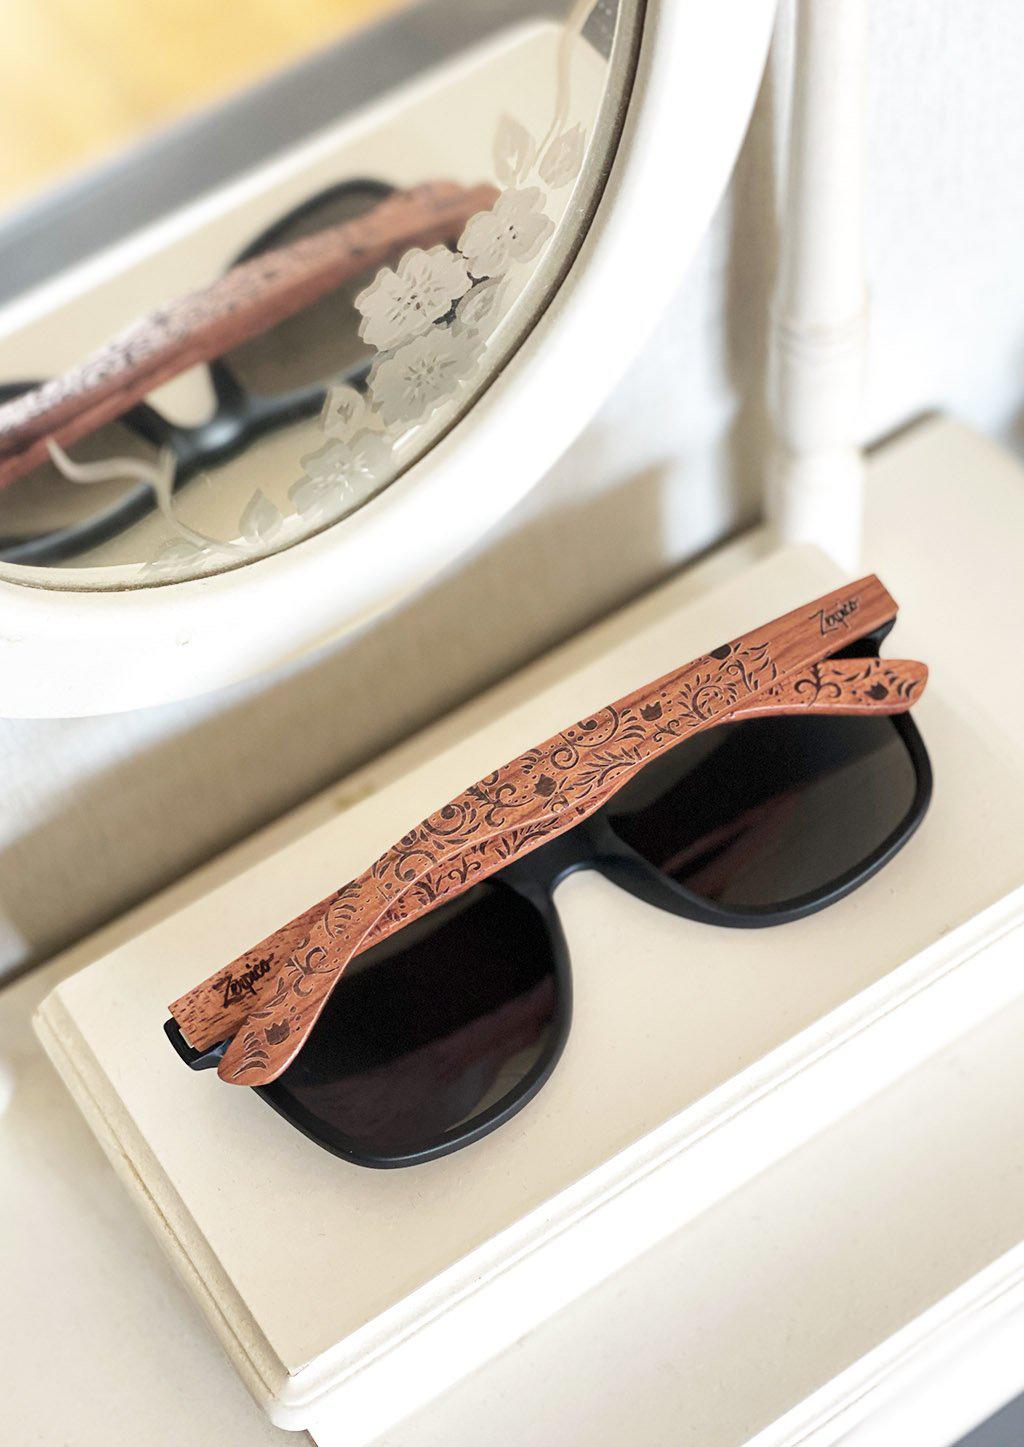 Engraved wood sunglasses from Zerpico. Oasis is handmade with floral pattern.